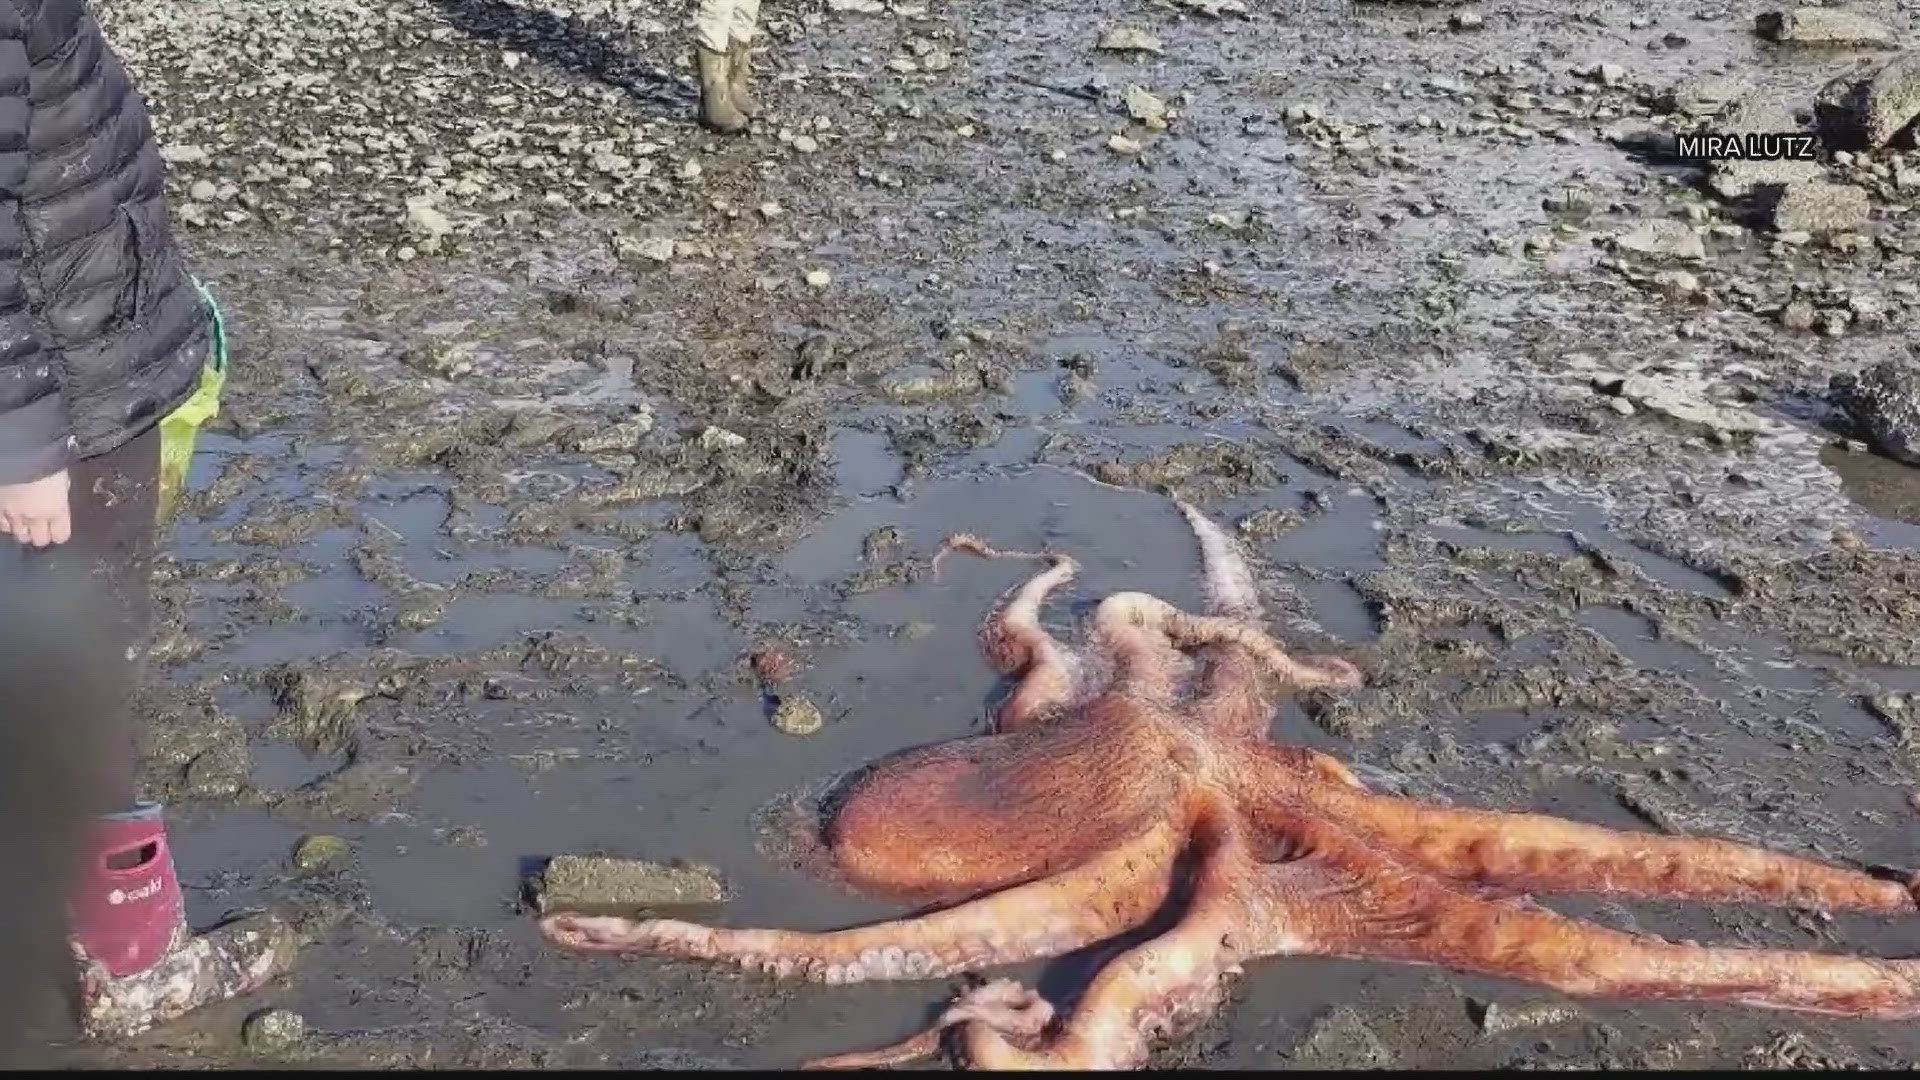 A little girl kept the octopus alive by pouring water on it with her sand bucket until officials arrived.